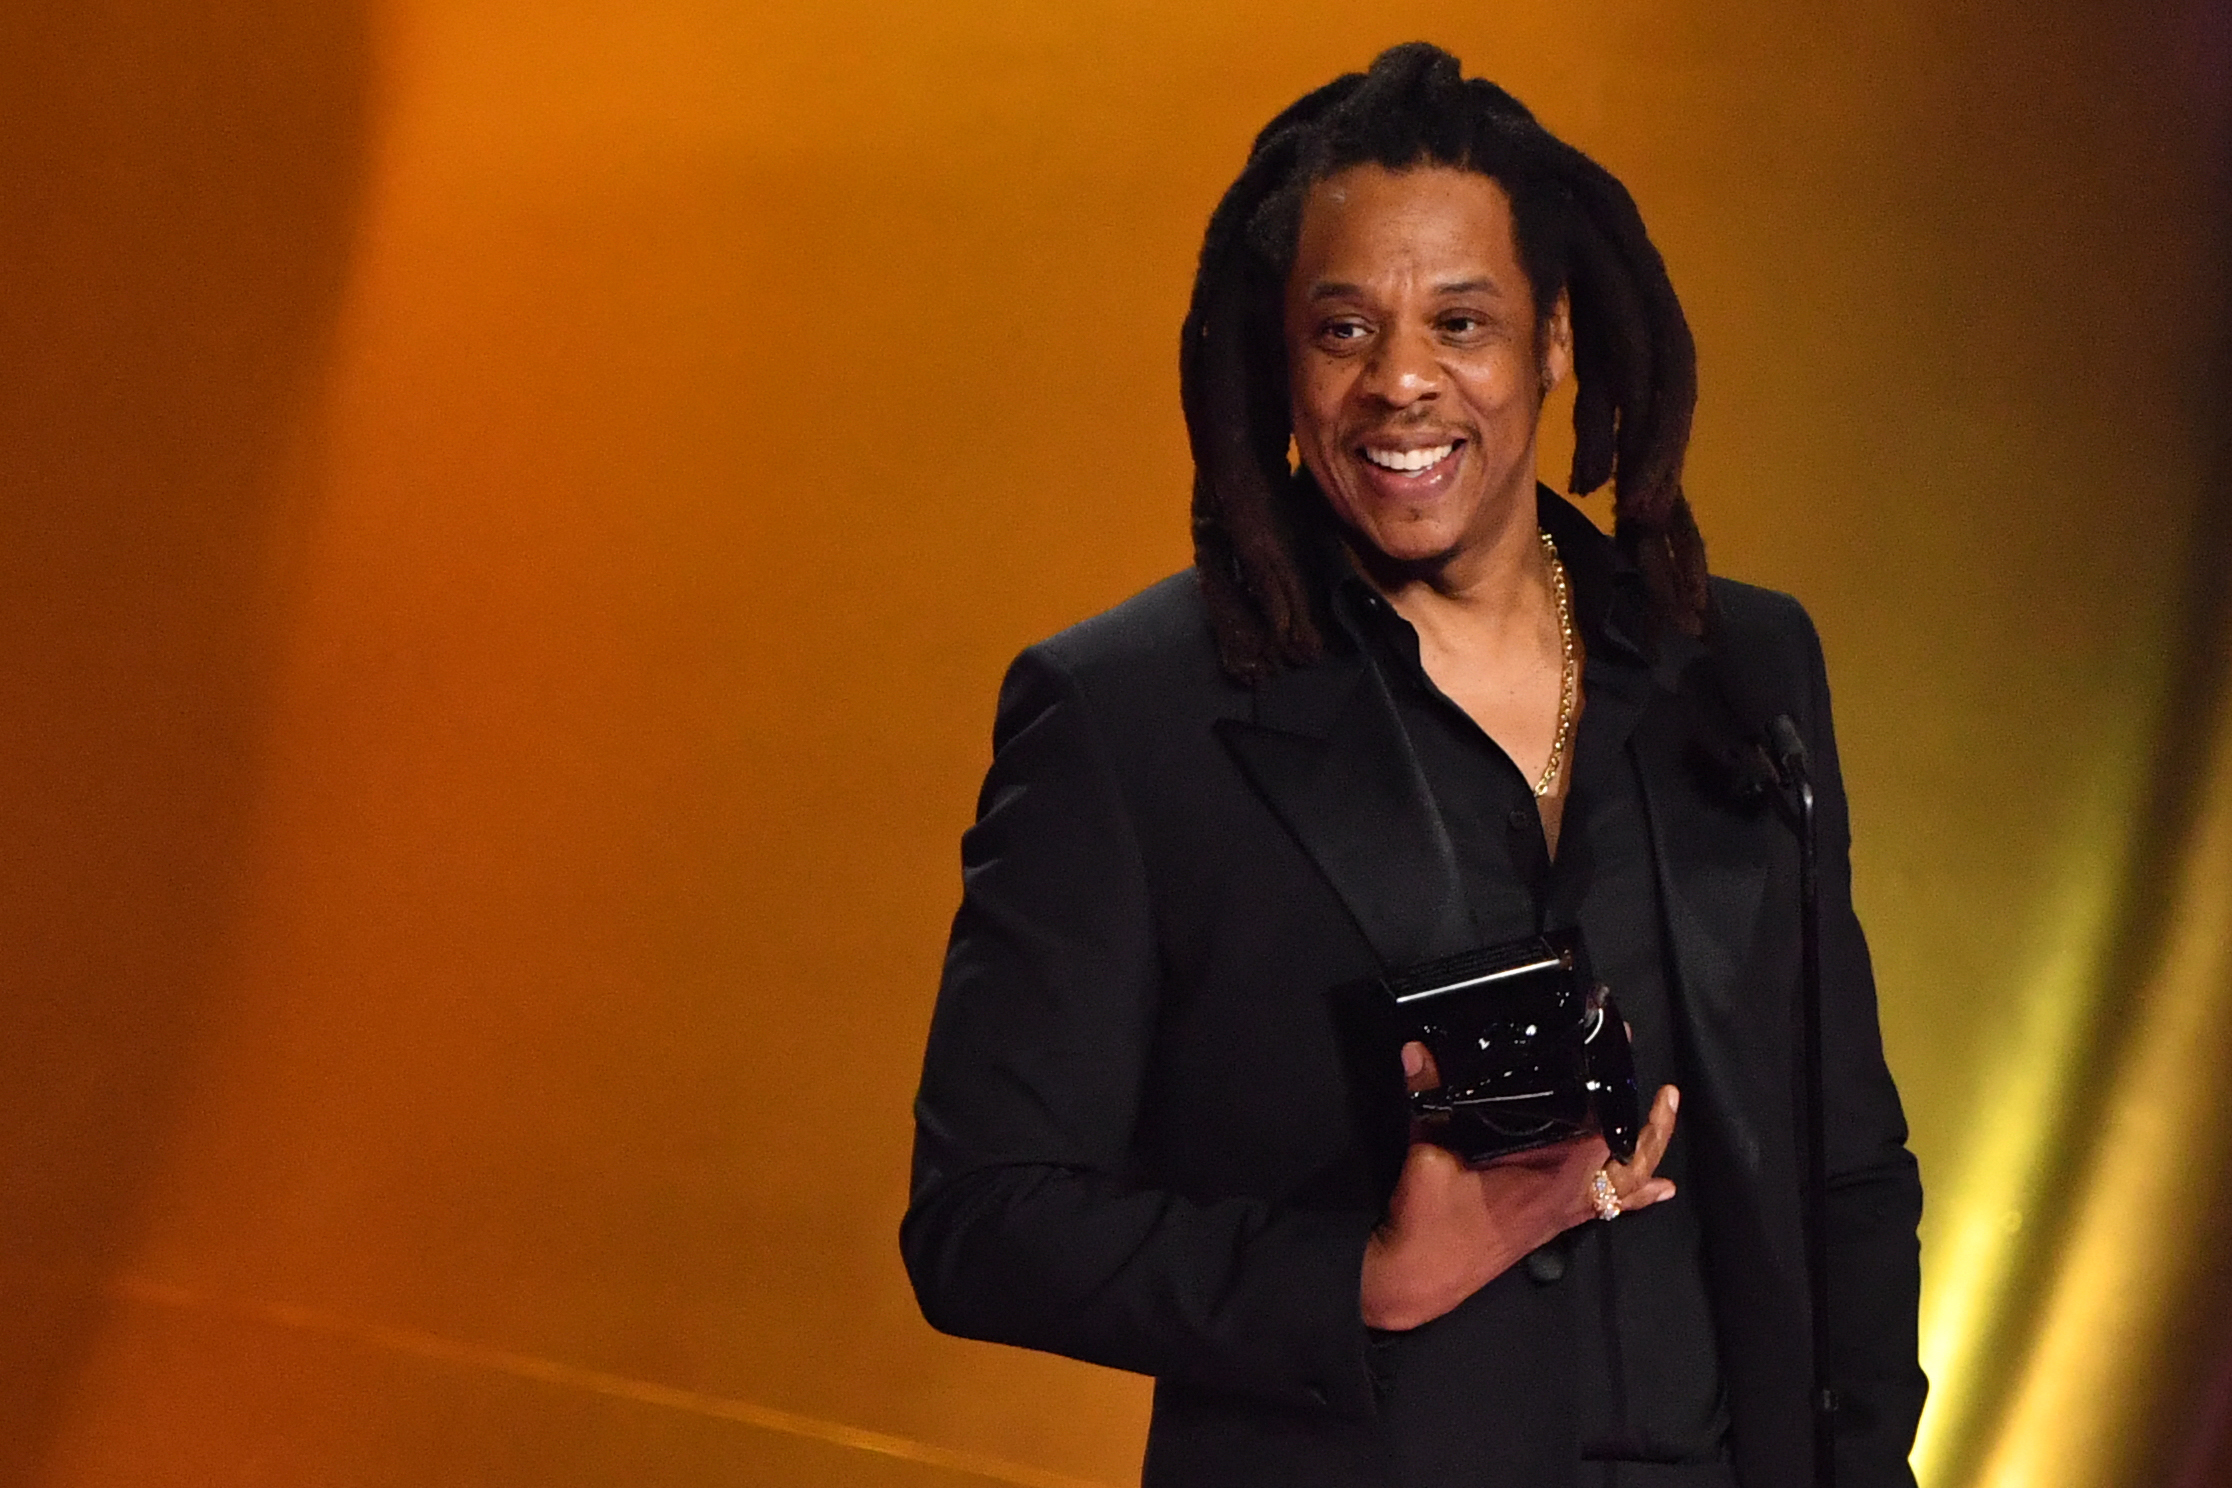 Jay-Z accepts the Dr. Dre Global Impact Award